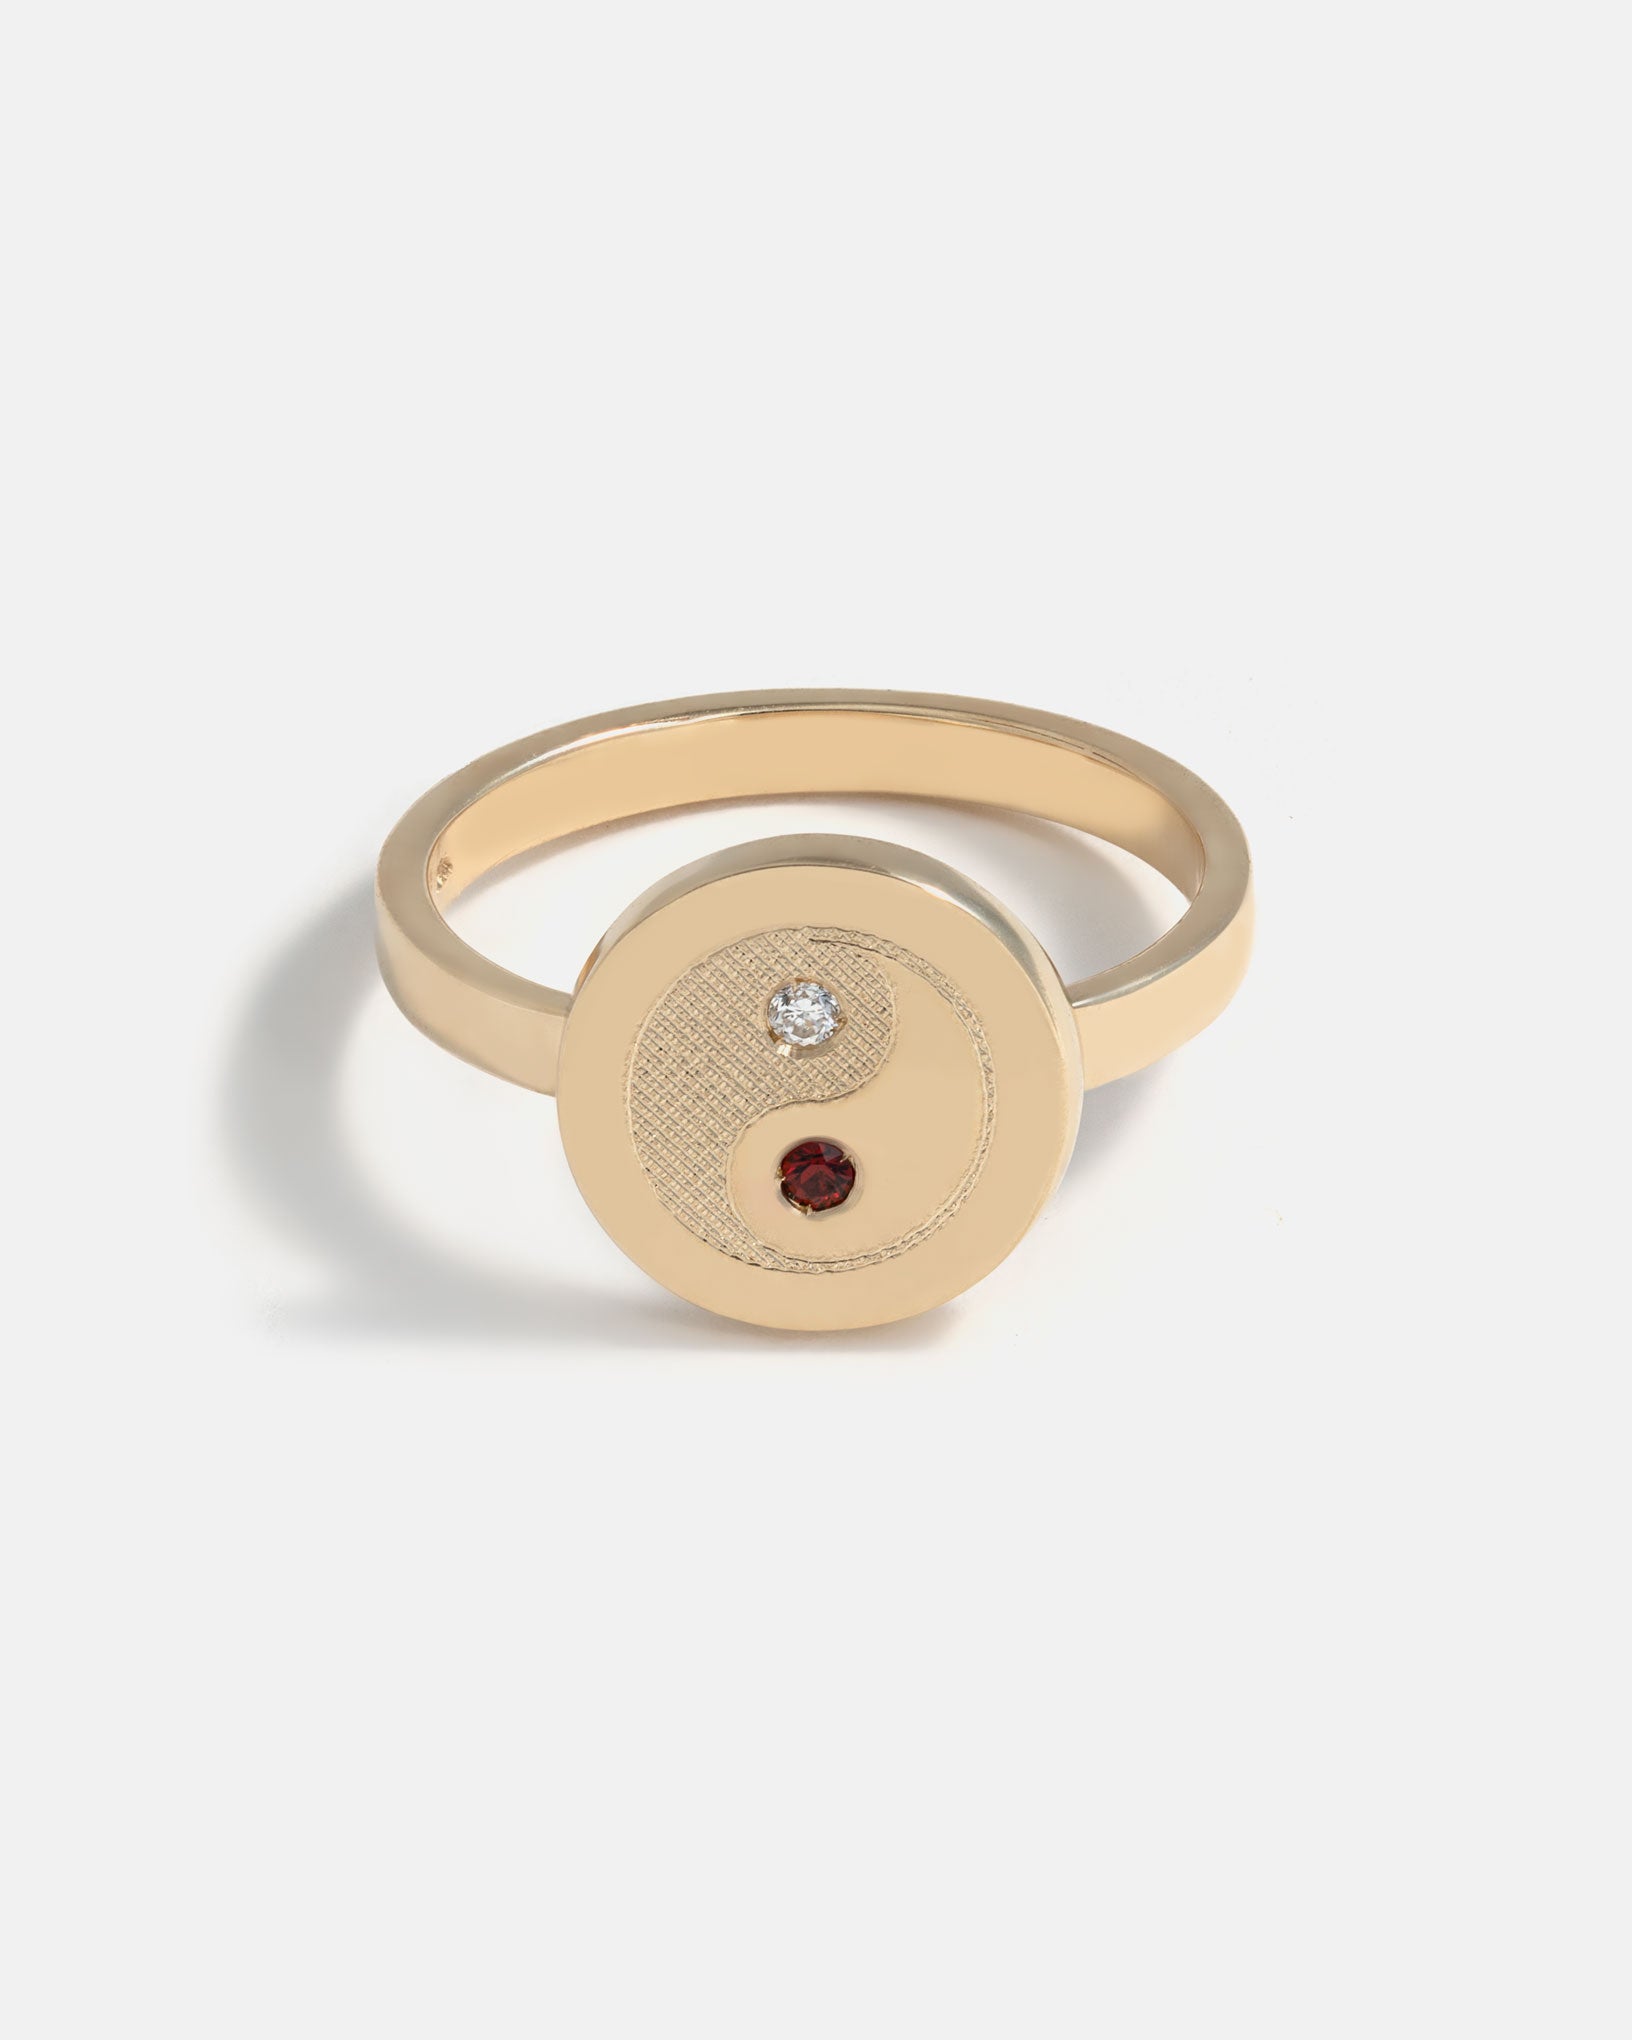 Yin & Yang Ring in 14k Yellow Gold with lab grown Diamond and Anthill Garnet